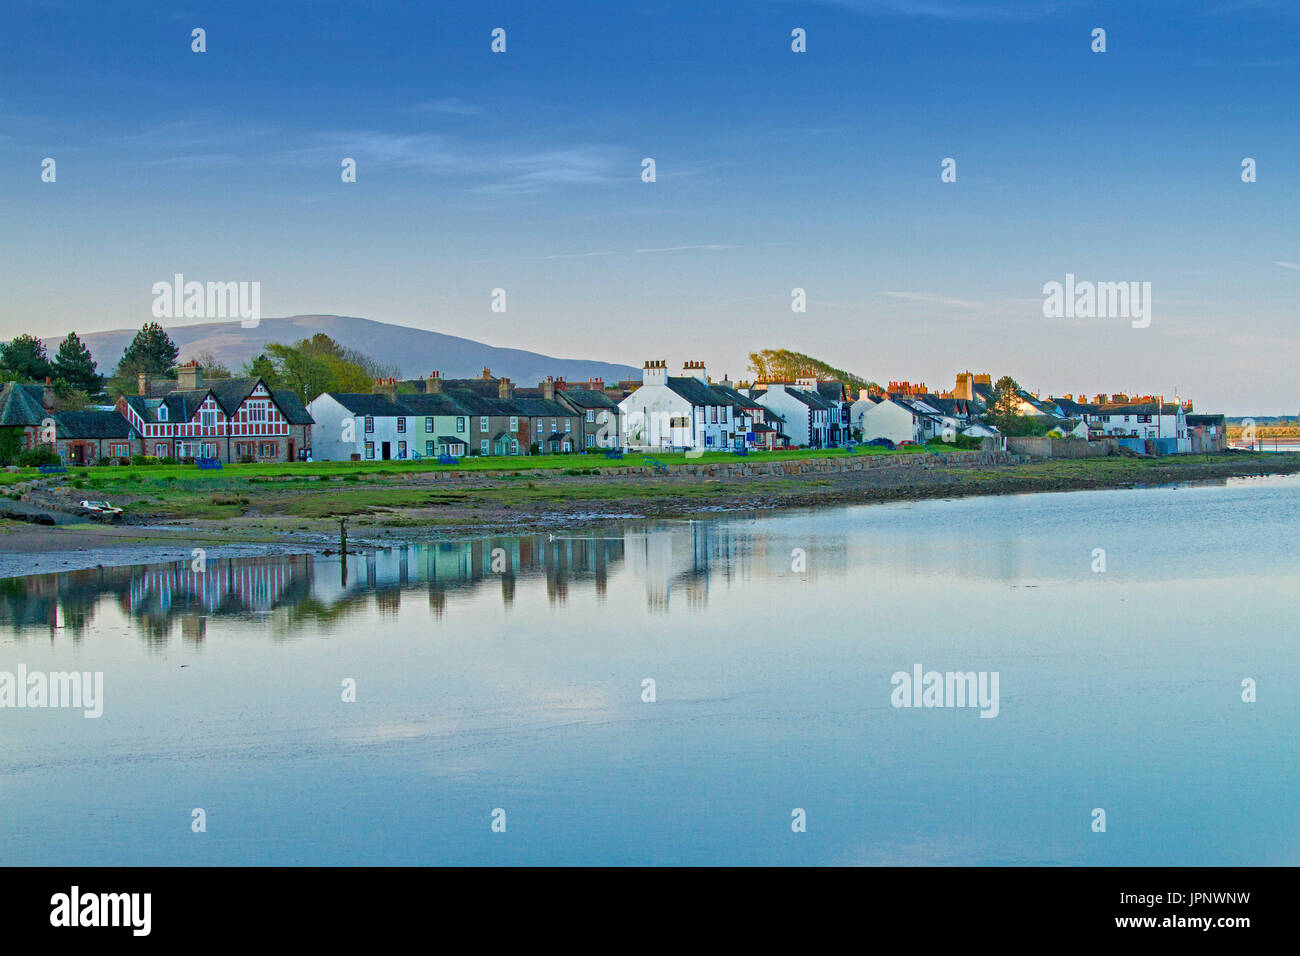 Panoramic view of waterfront houses at coastal village of Ravenglass reflected in mirror surface of blue ocean under blue sky in Cumbria, England Stock Photo